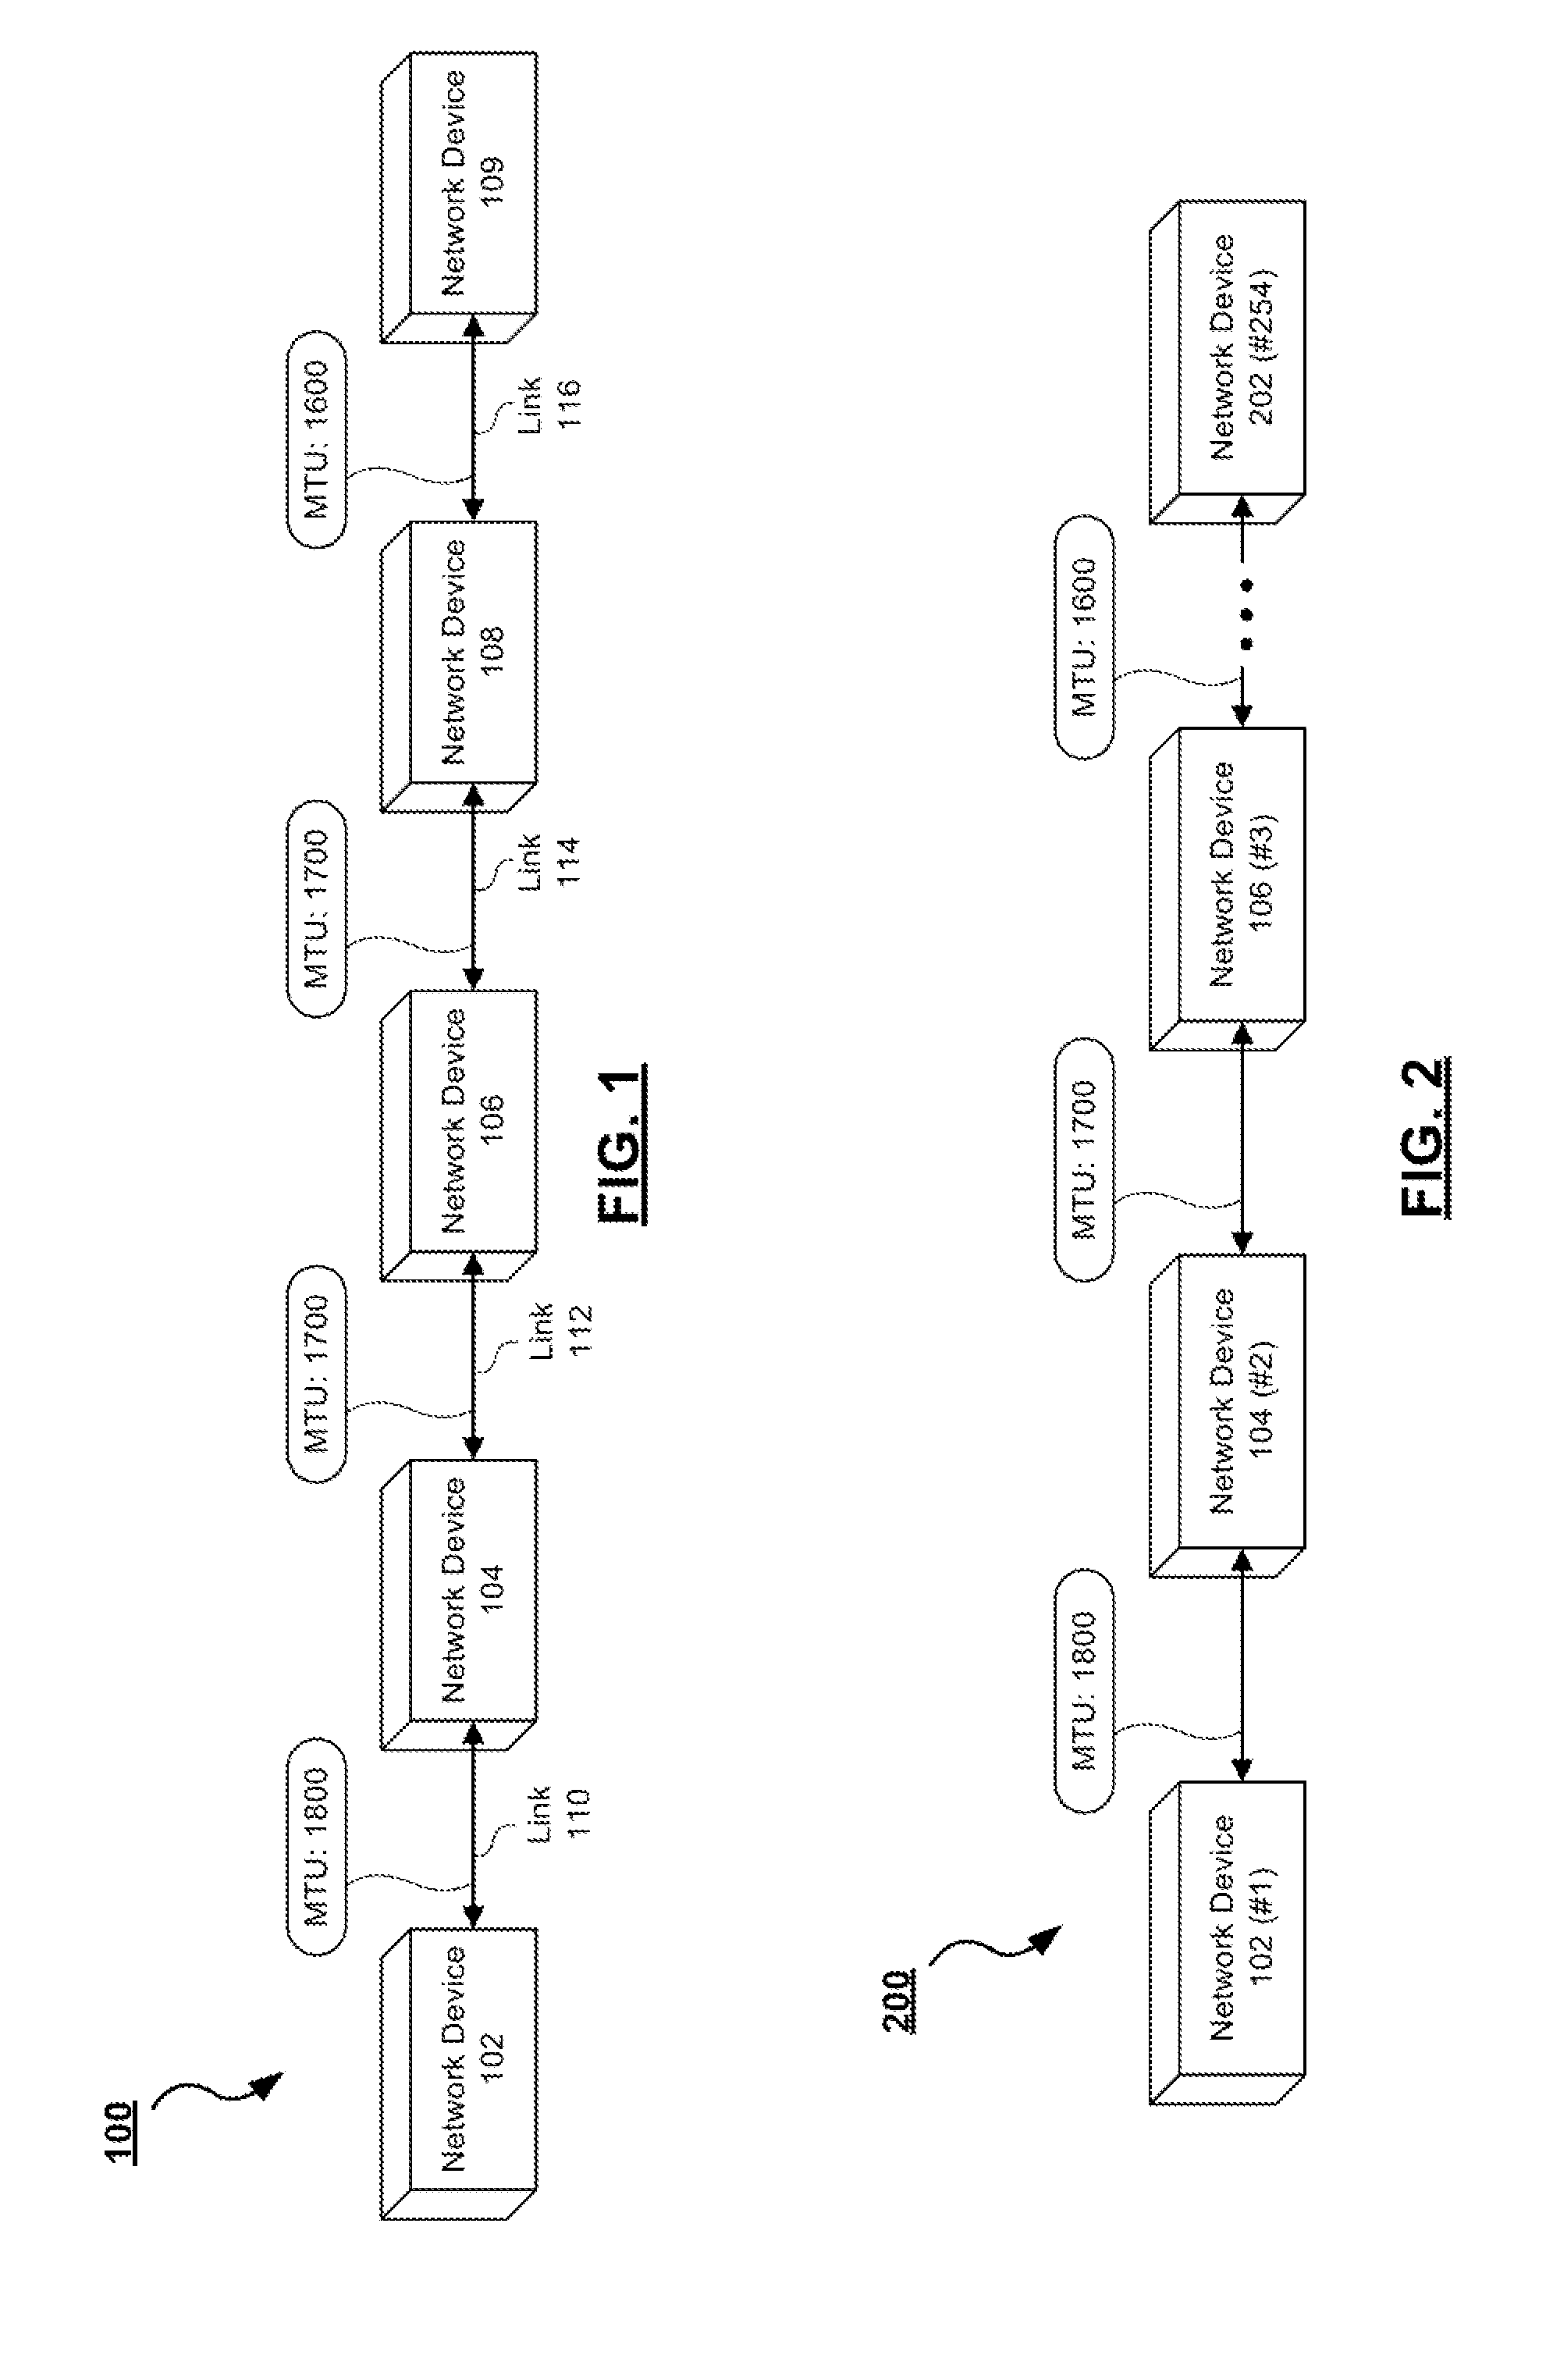 Systems and methods for path maximum transmission unit discovery